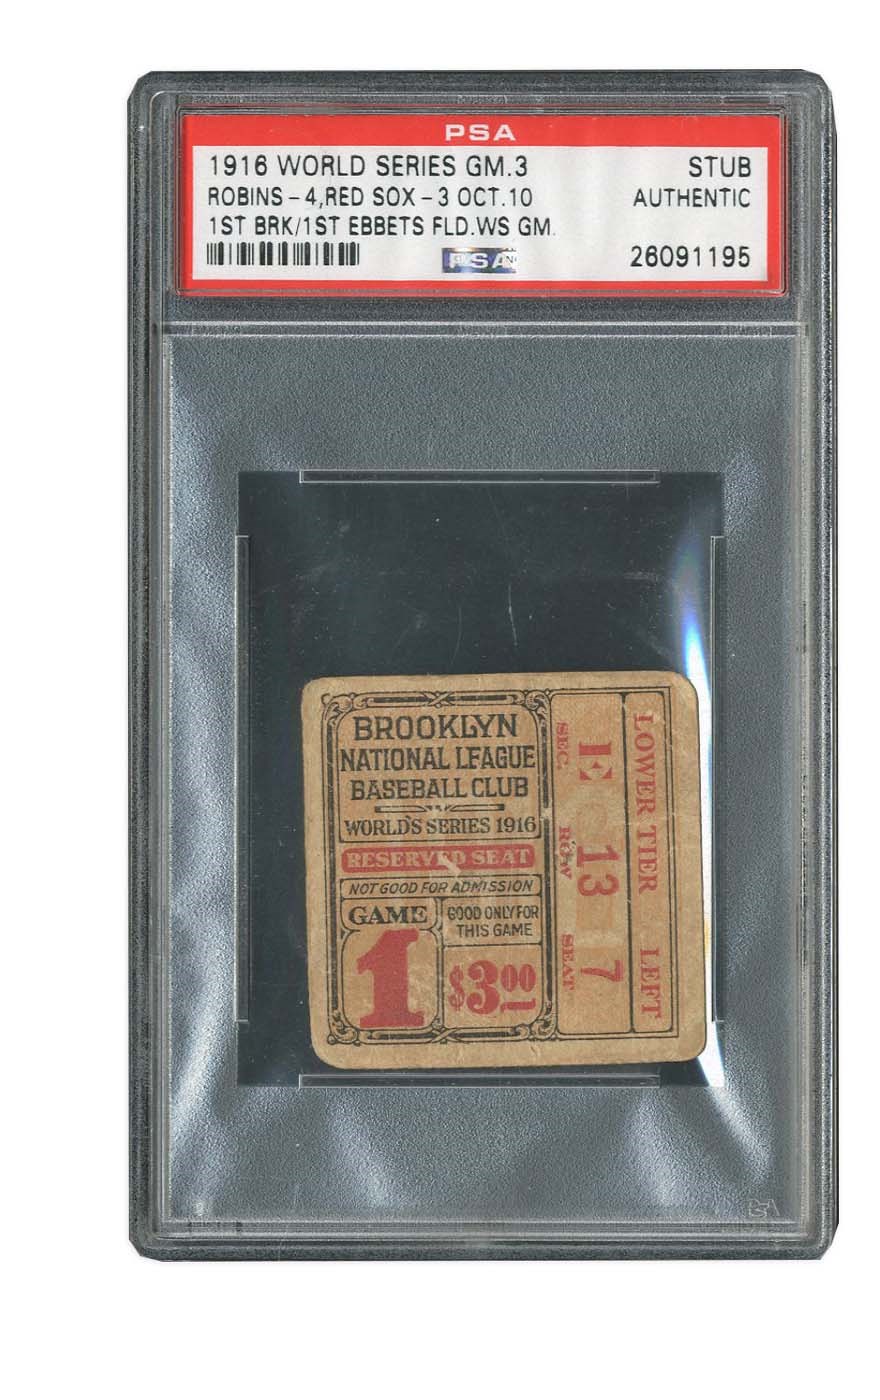 Tickets, Publications & Pins - 1916 World Series Ticket at Brooklyn (PSA Authentic)